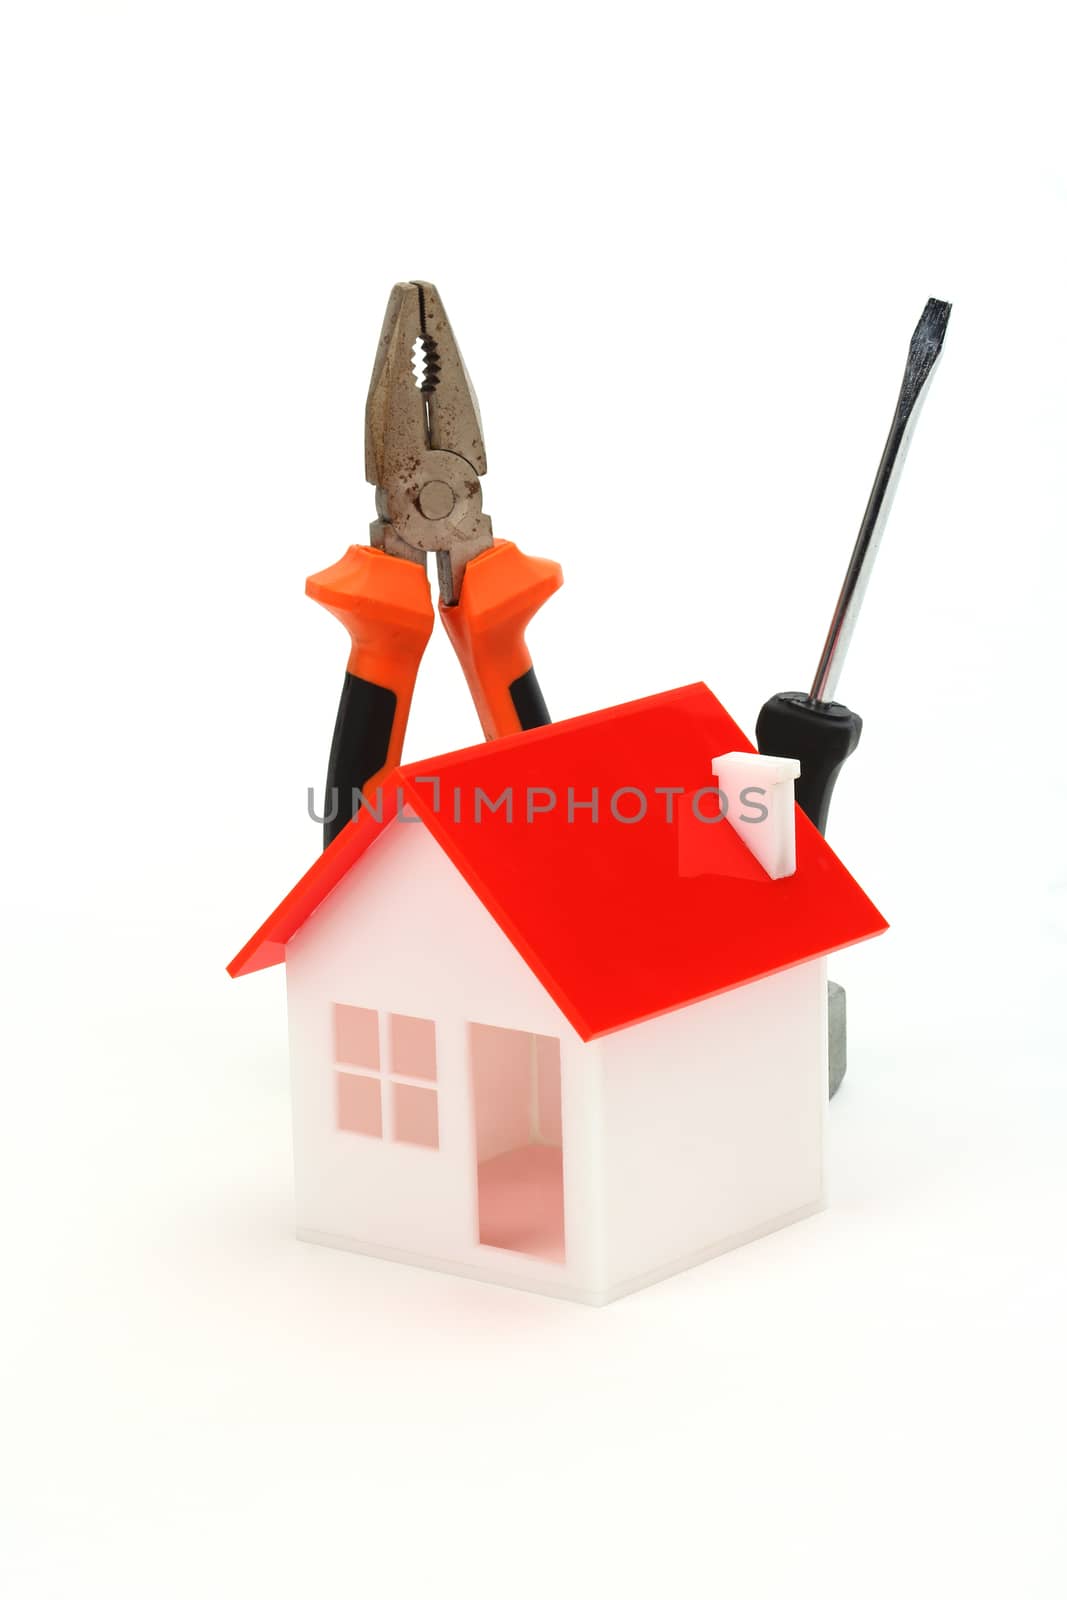 model of house and tools over white